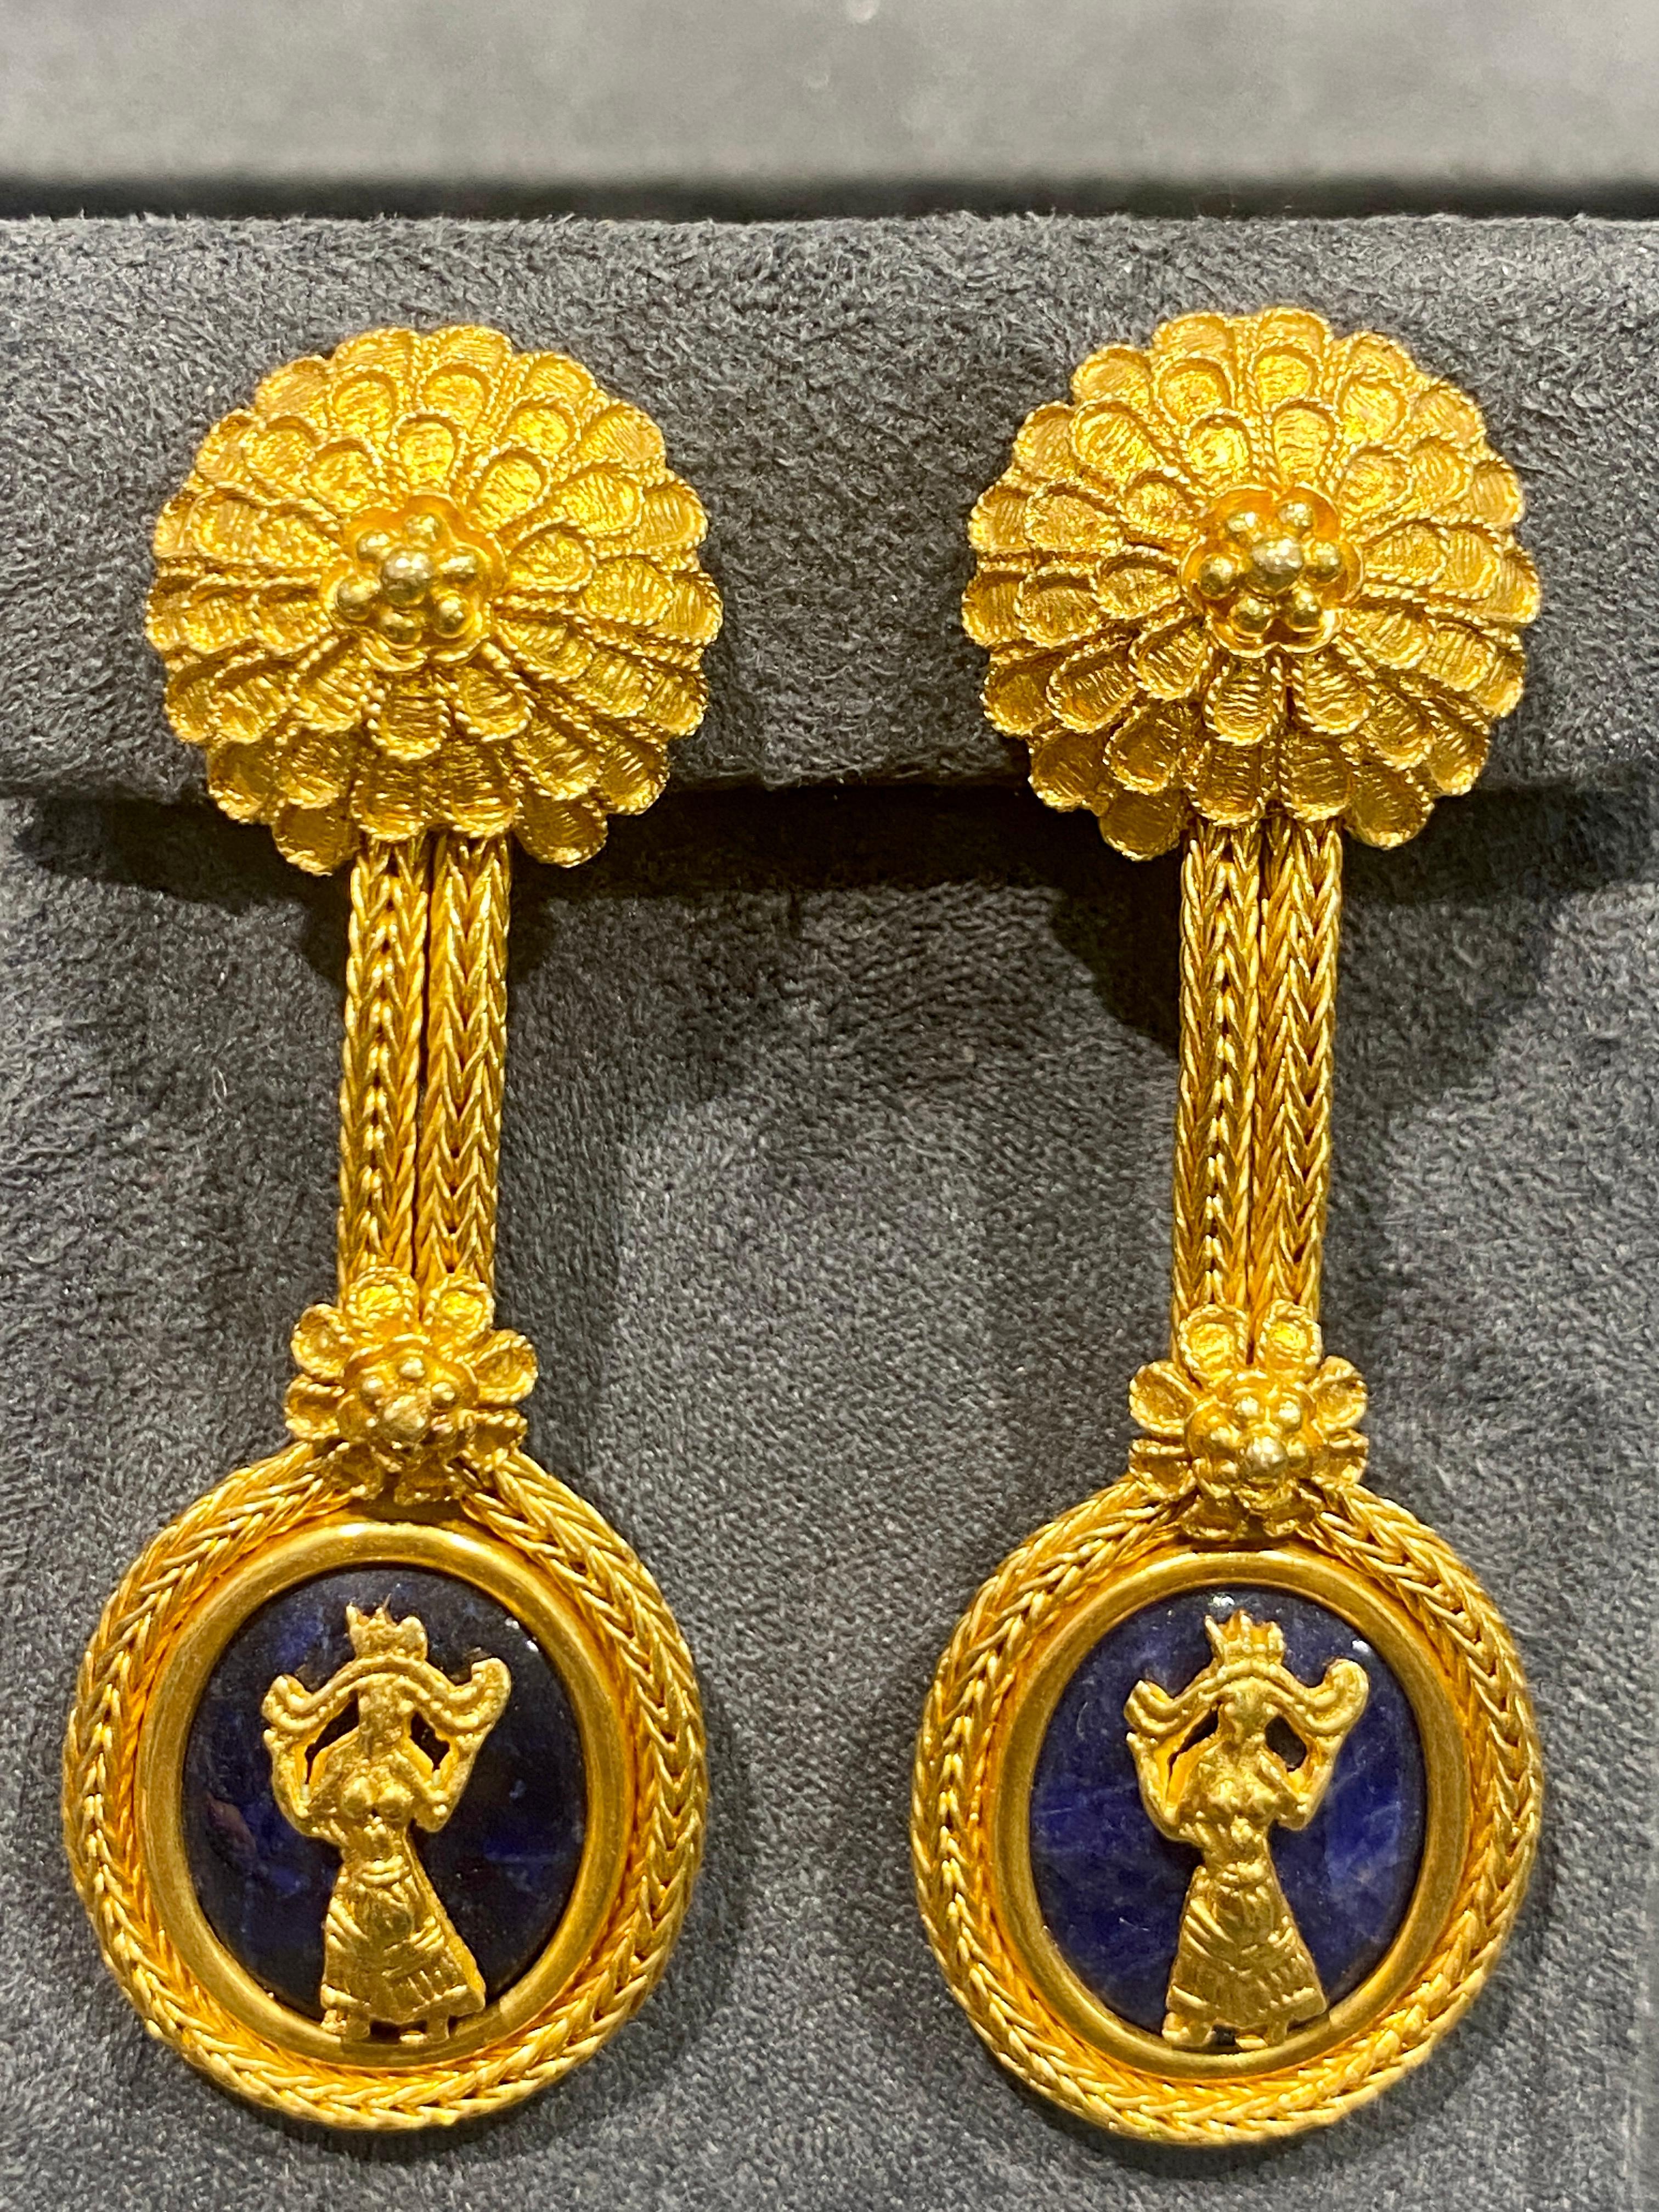 These impressive 18k gold Lalaounis clip-on dangly earrings are classical in design. The top of the earring that rests on the earlobe is an intricate floral pattern while at the bottom there is a vignette of a golden female figure on an oval shaped